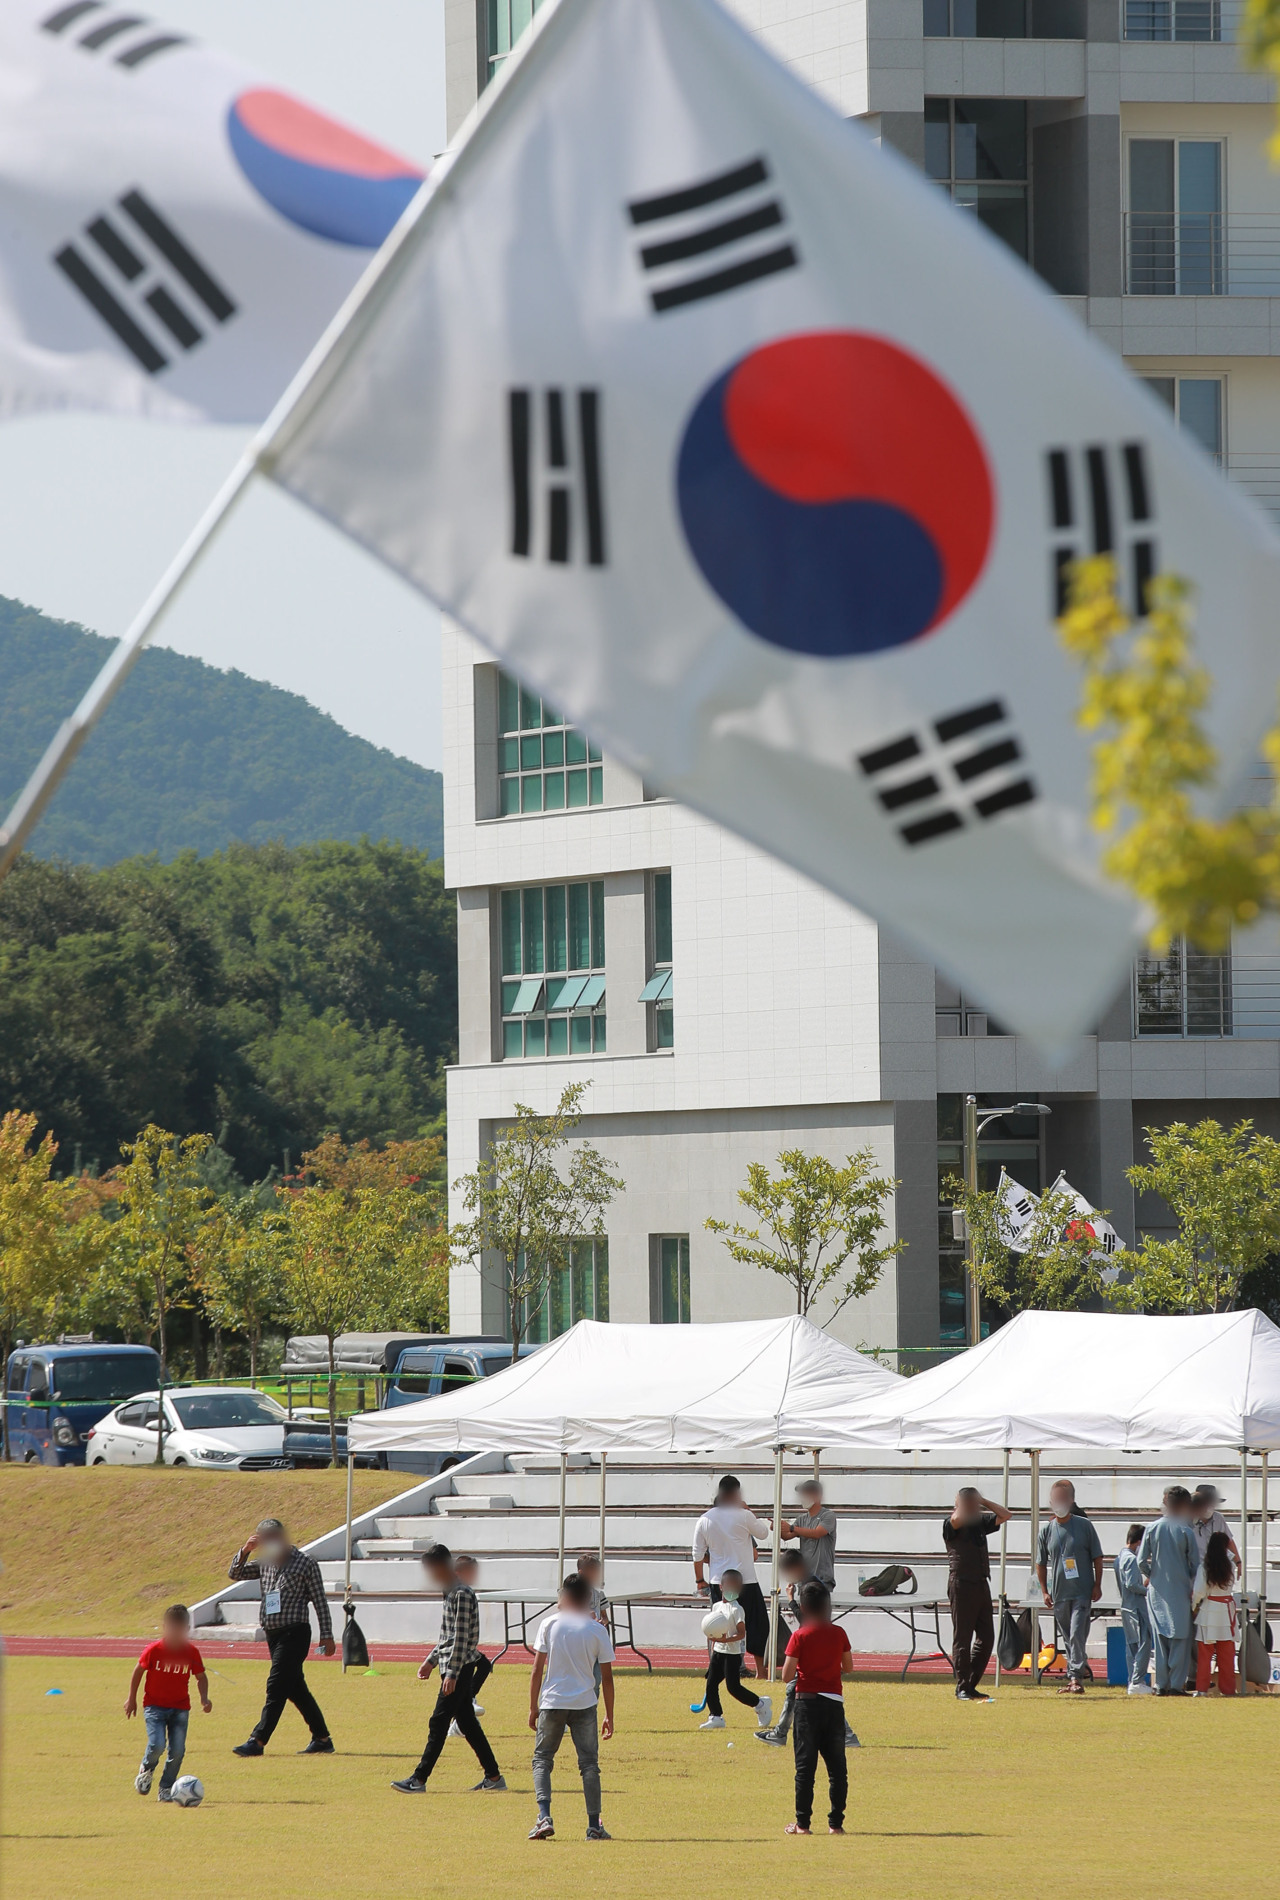 Afghan evacuees participate in outdoor activities at the National Human Resources Development Institute in Jincheon, North Chungcheong Province, on Sept. 13 after completing a mandatory two-week self-quarantine upon arriving in Korea. (Yonhap)